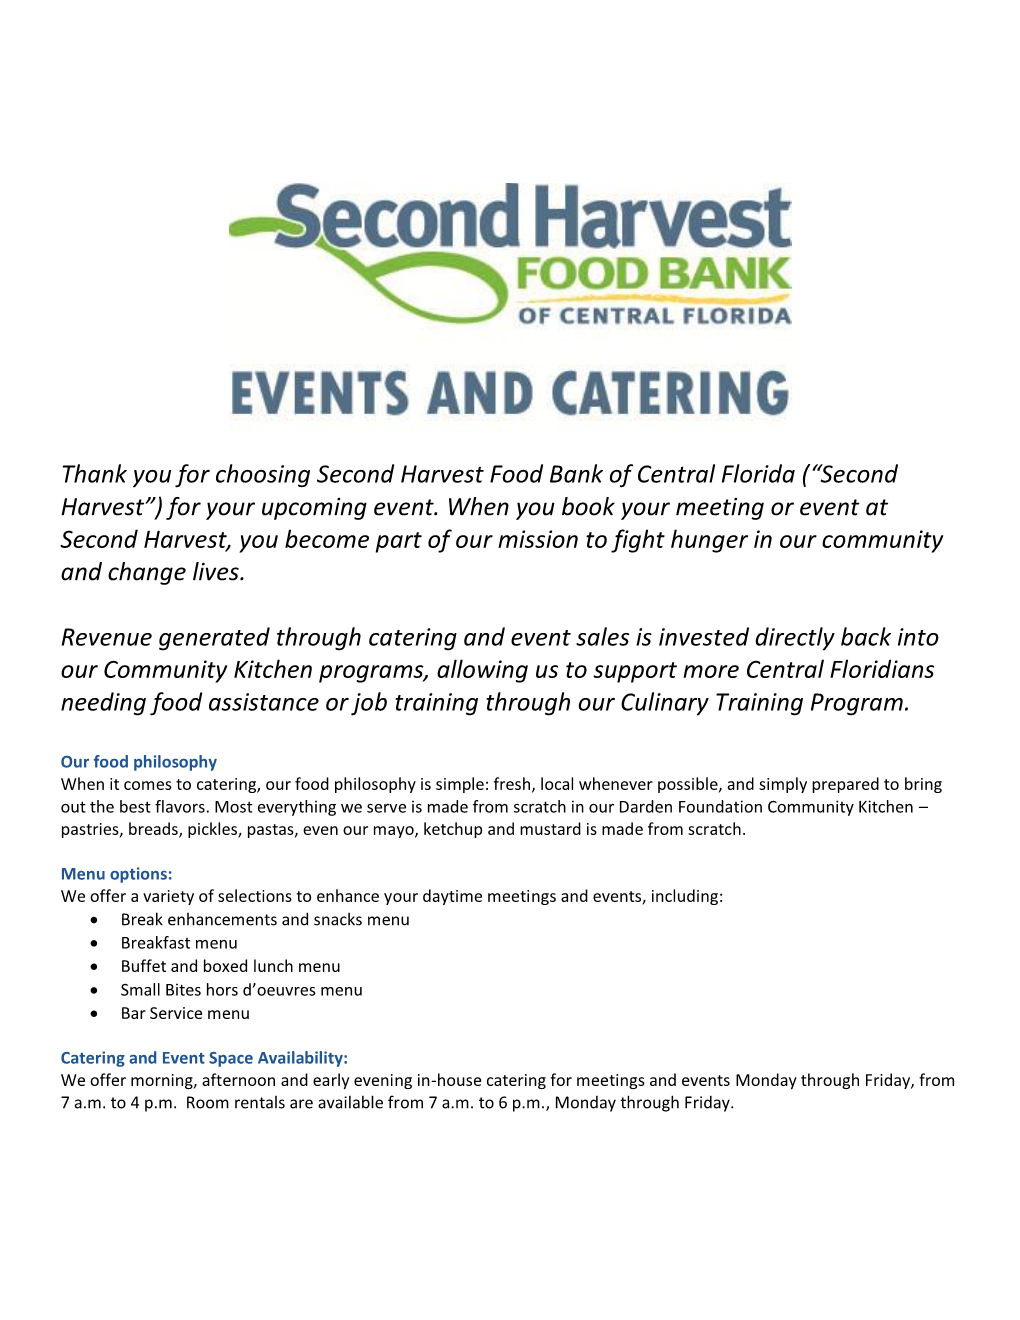 For Your Upcoming Event. When You Book Your Meeting Or Event at Second Harvest, You Become Part of Our Mission to Fight Hunger in Our Community and Change Lives